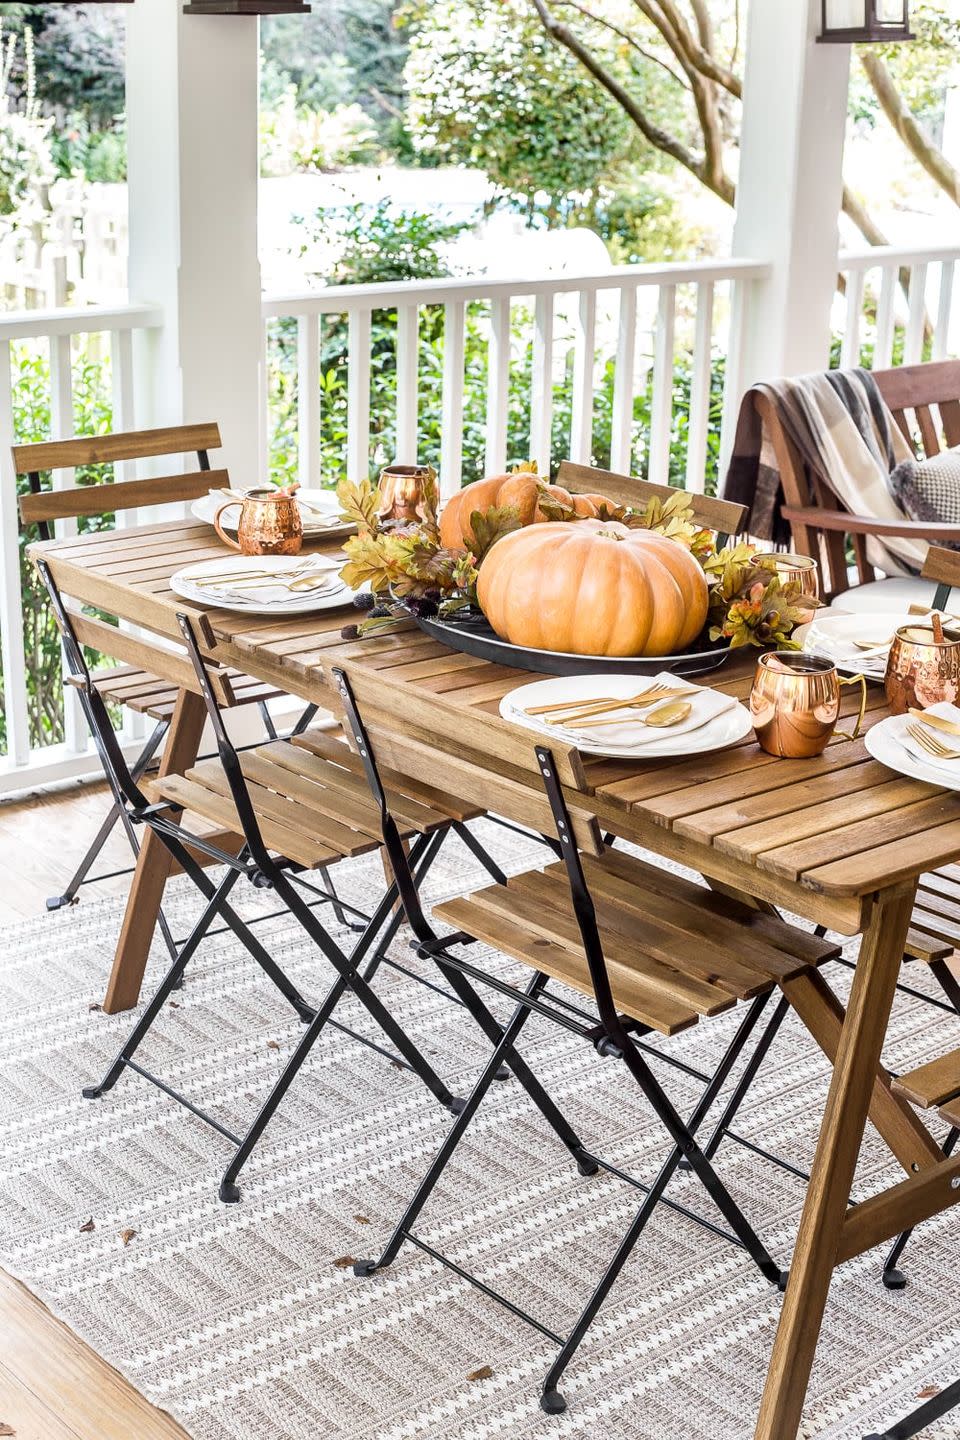 34) Decorate Your Outdoor Dining Table